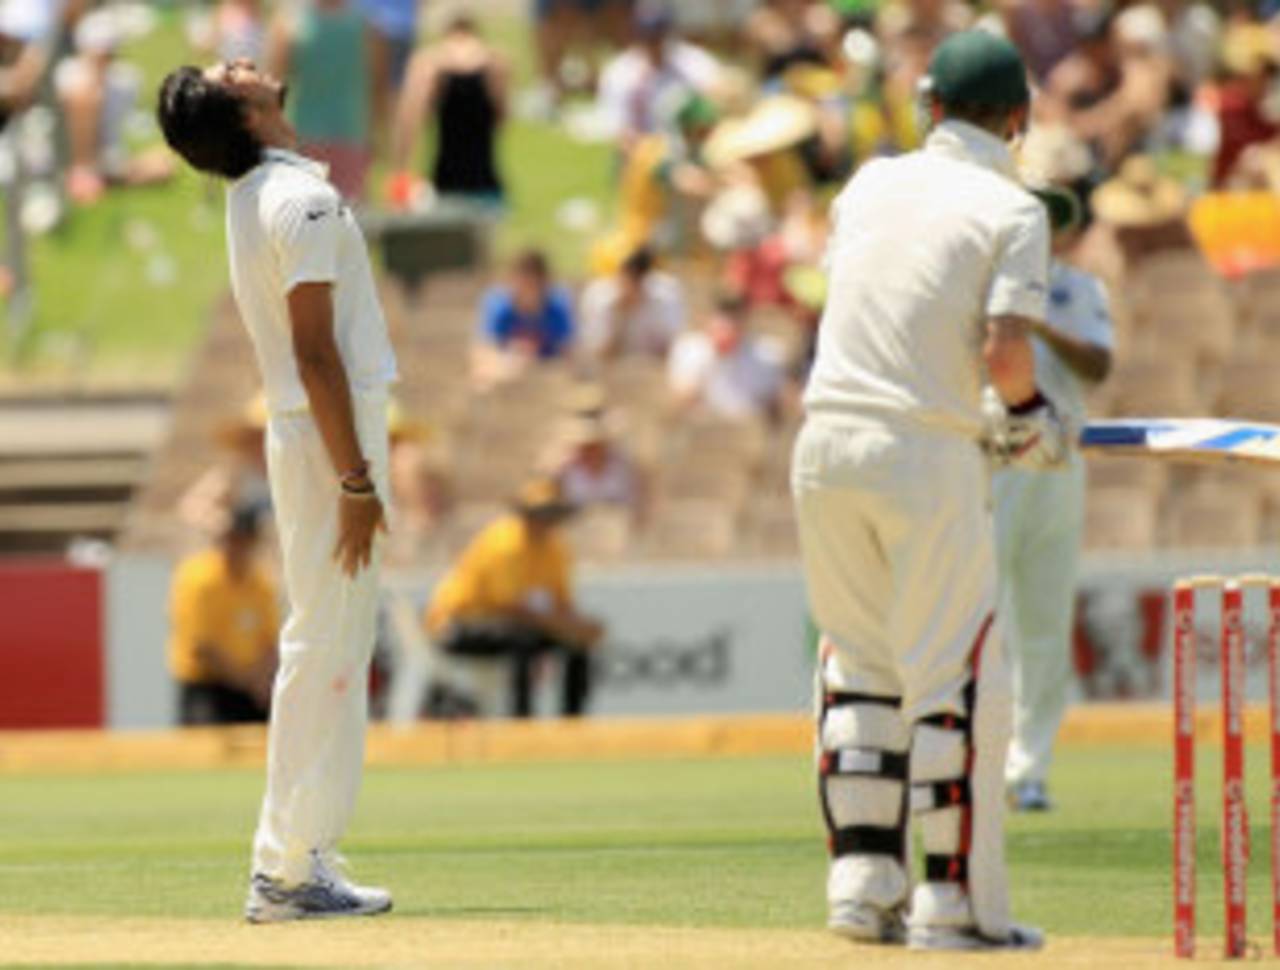 Ishant Sharma had another frustrating day in the field, Australia v India, 4th Test, Adelaide, 1st day, January 24, 2012